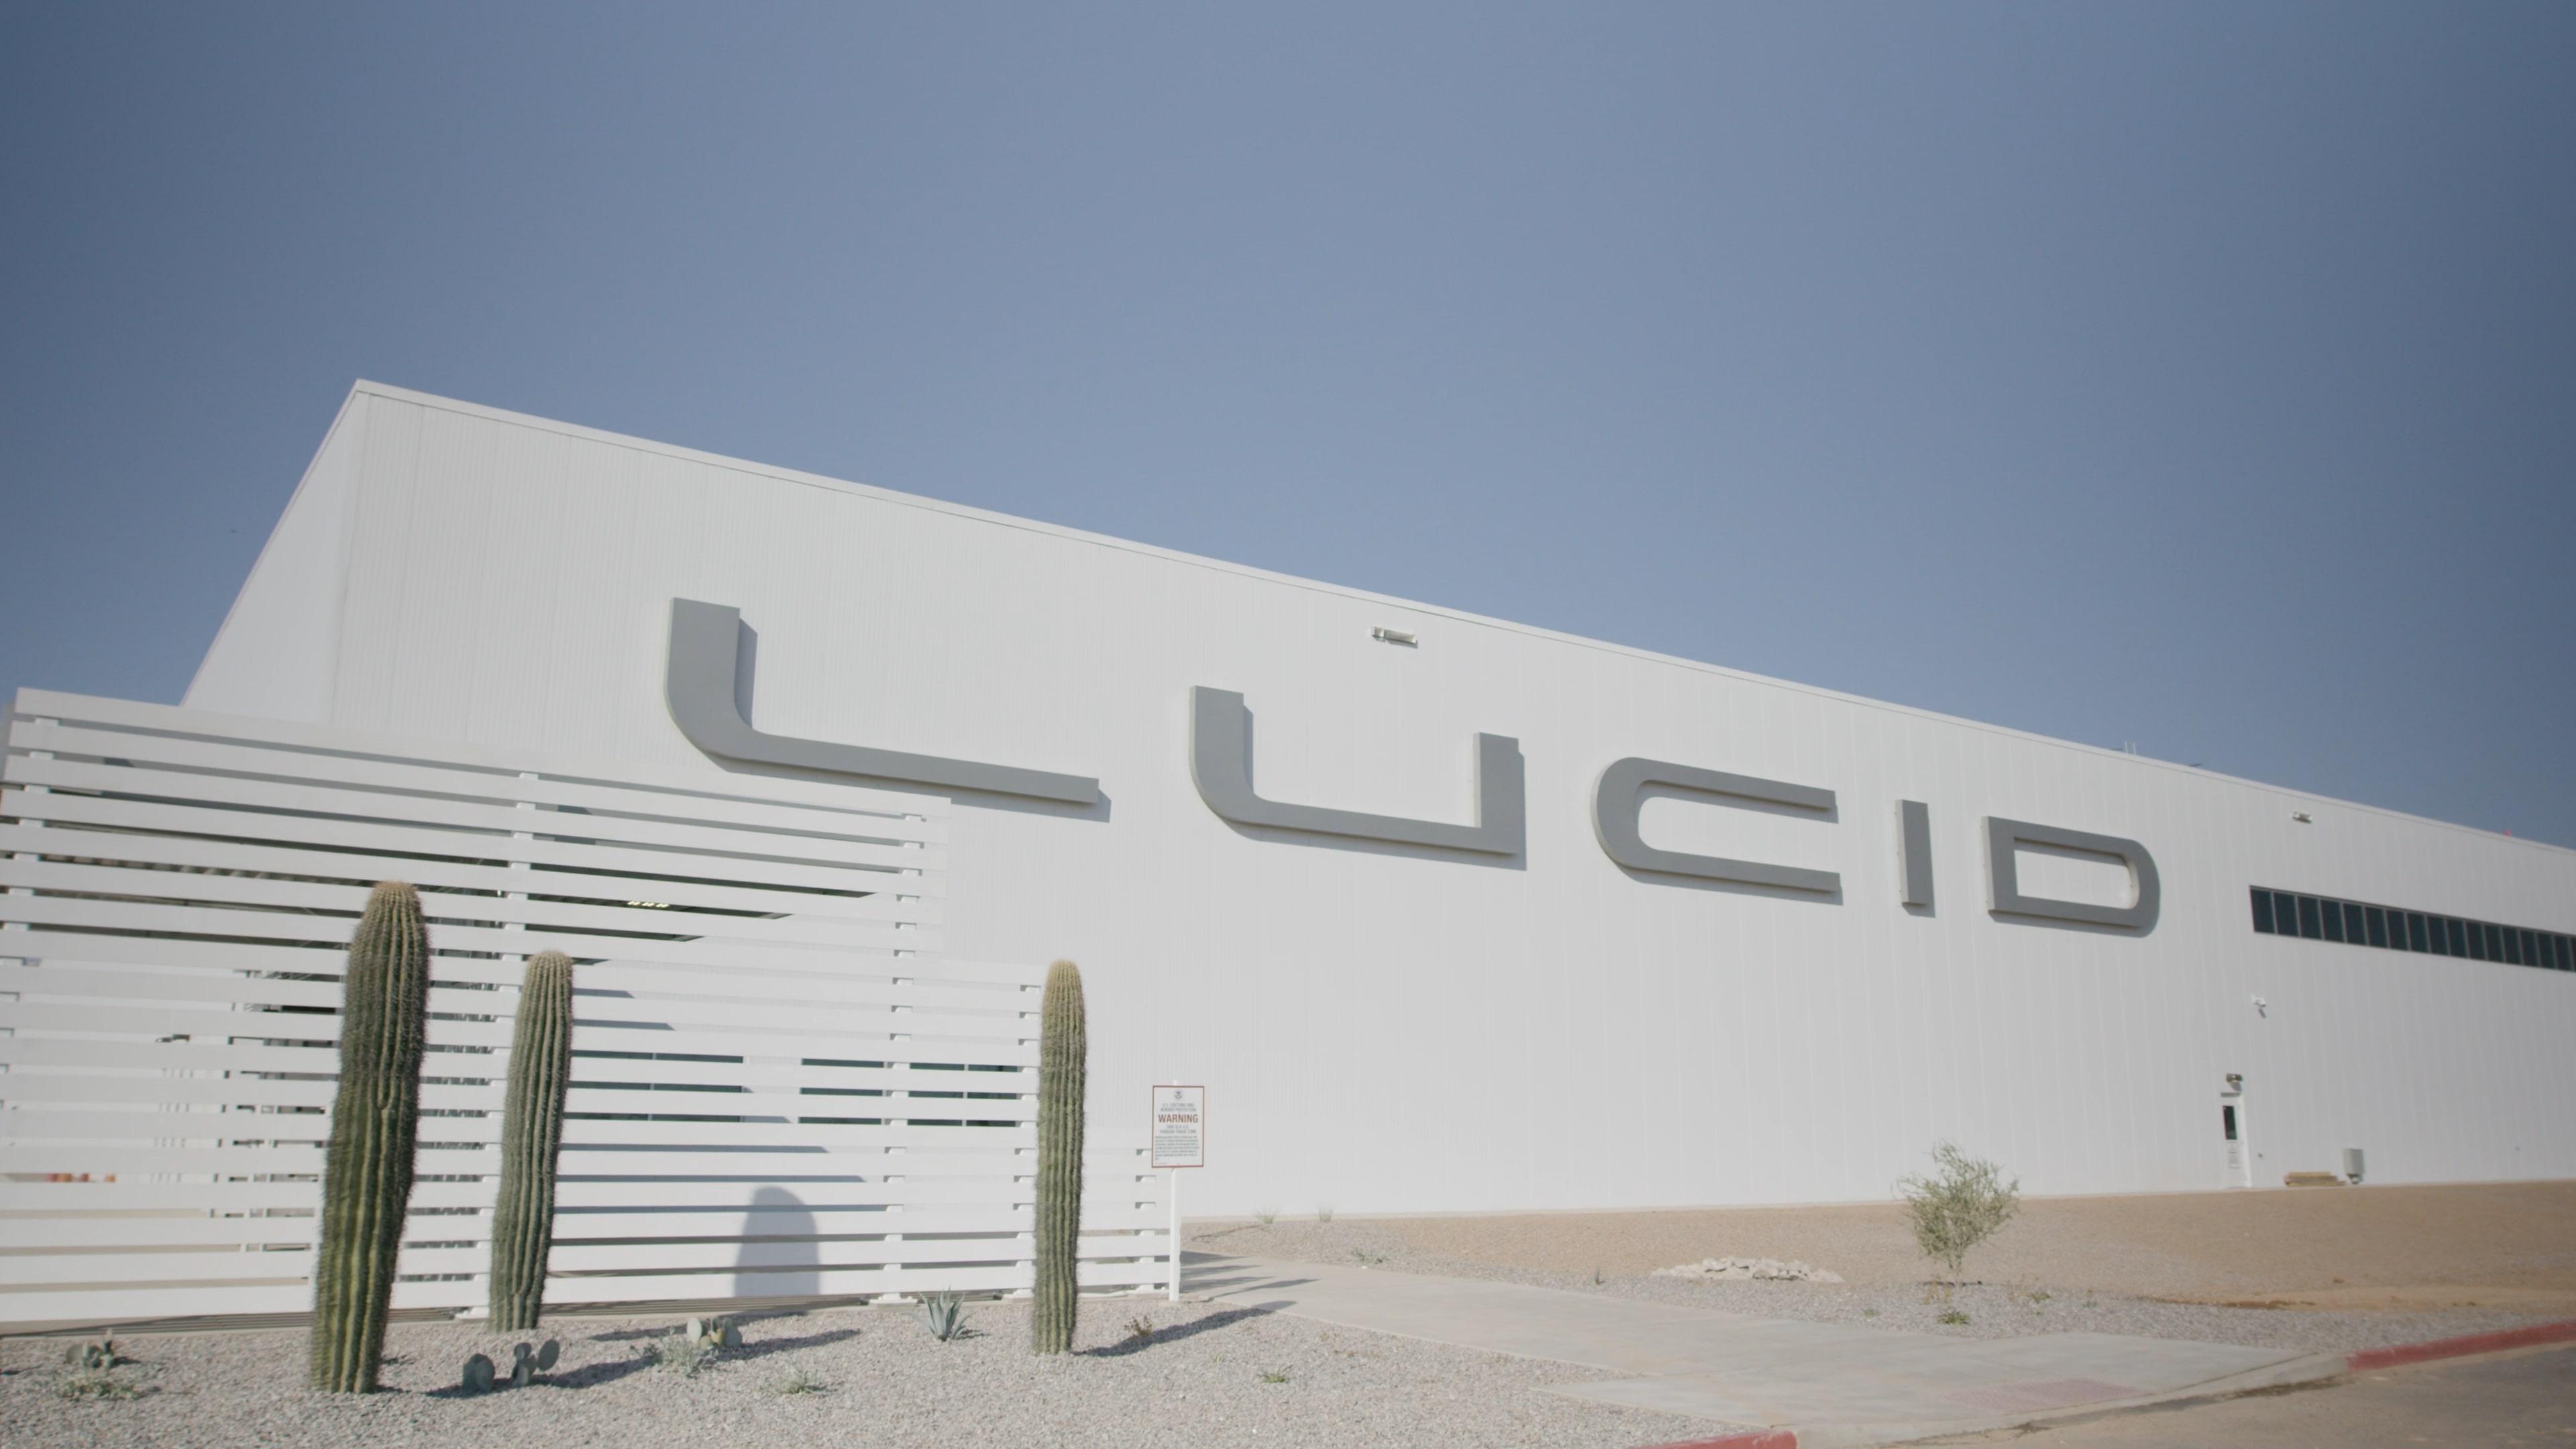 It’s too early to tell whether Lucid can surpass Tesla, but it’s exciting to compare the brands.